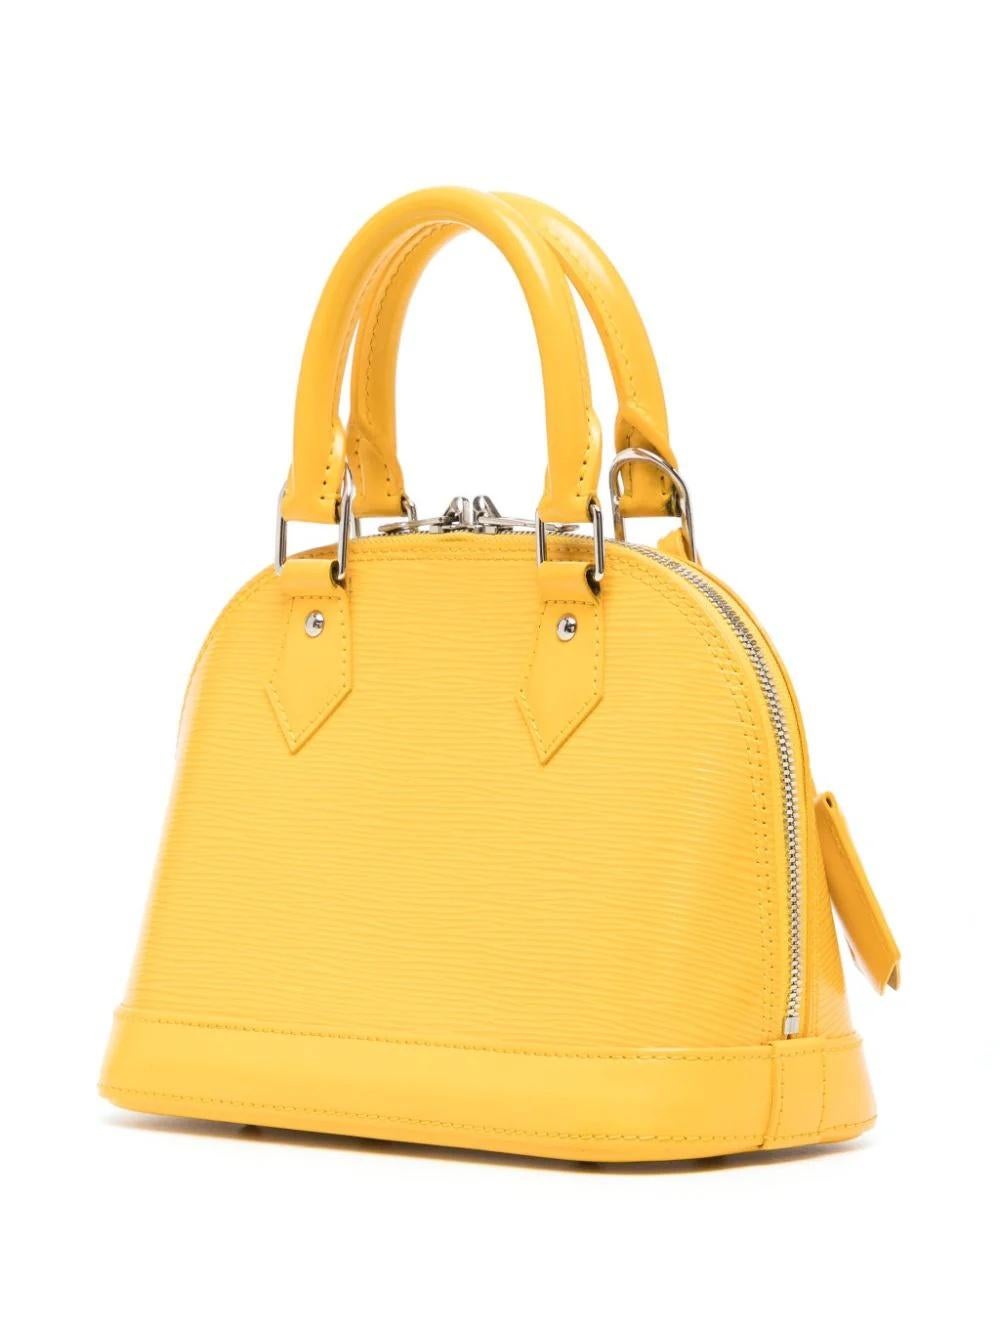 * Mustard yellow
* Épi leather
* Debossed logo to the front
* Two rolled top handles
* Two-way zip fastening
* Detachable shoulder strap
* Main compartment
* Internal slip pocket
* Suede lining
* Metal feet
* Hanging key fob
* Silver-tone hardware
*